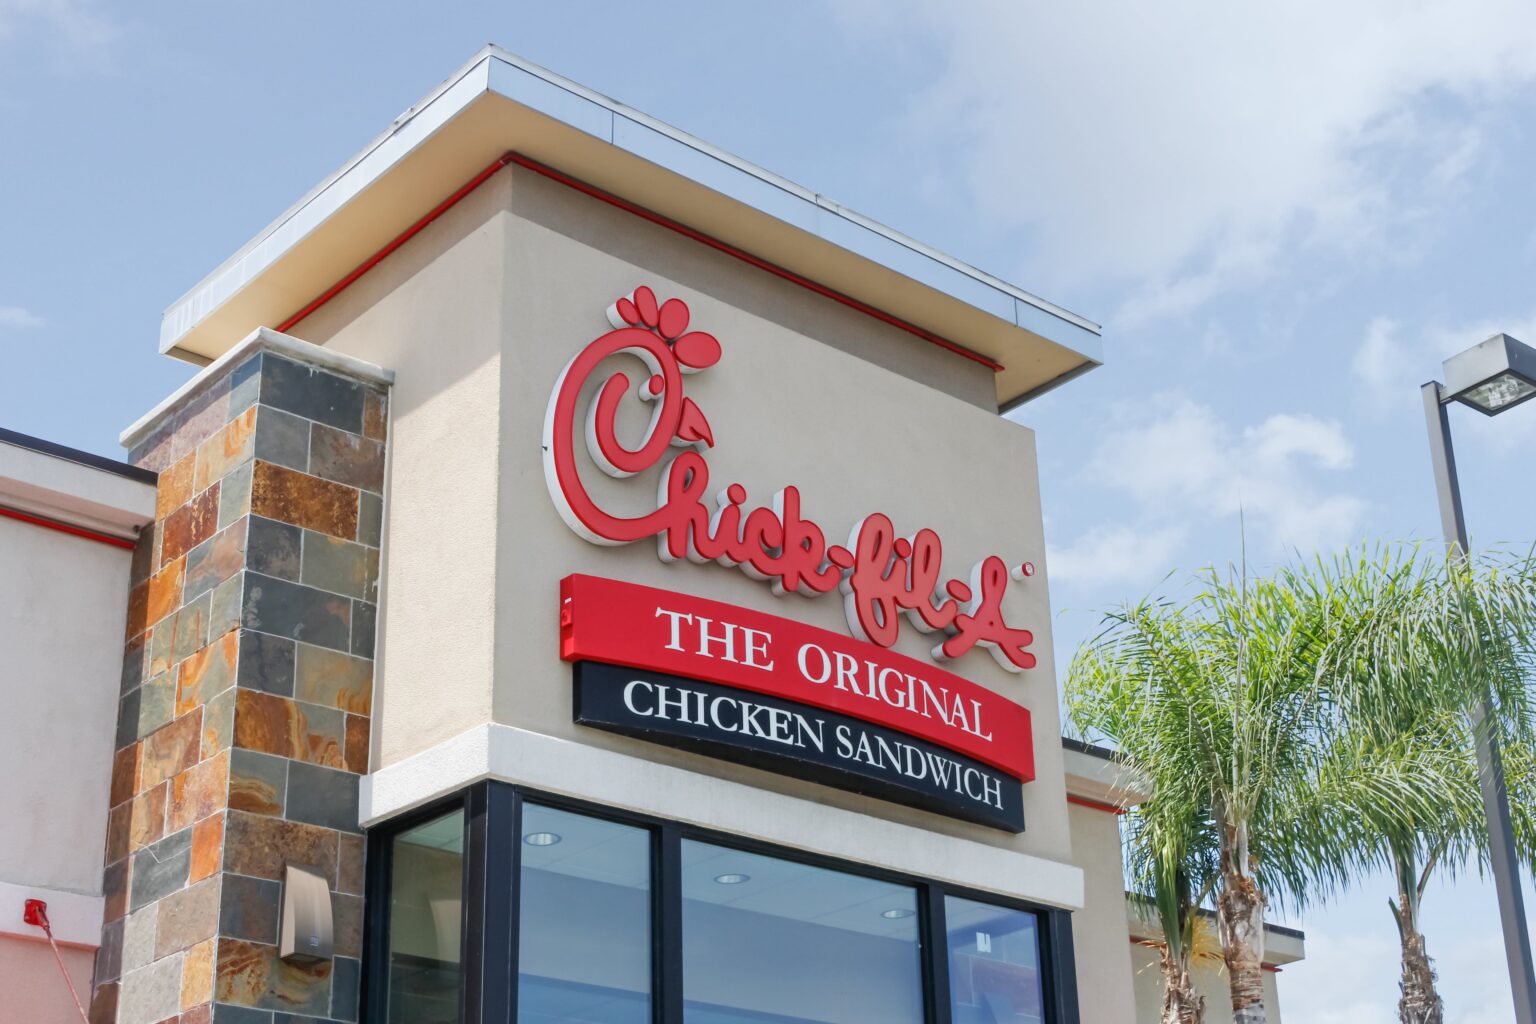 Investing in a Chick-fil-A franchise is one of the best ways to start your own business and be your own boss. Learn the ins and outs of becoming a Chick-fil-A operator.